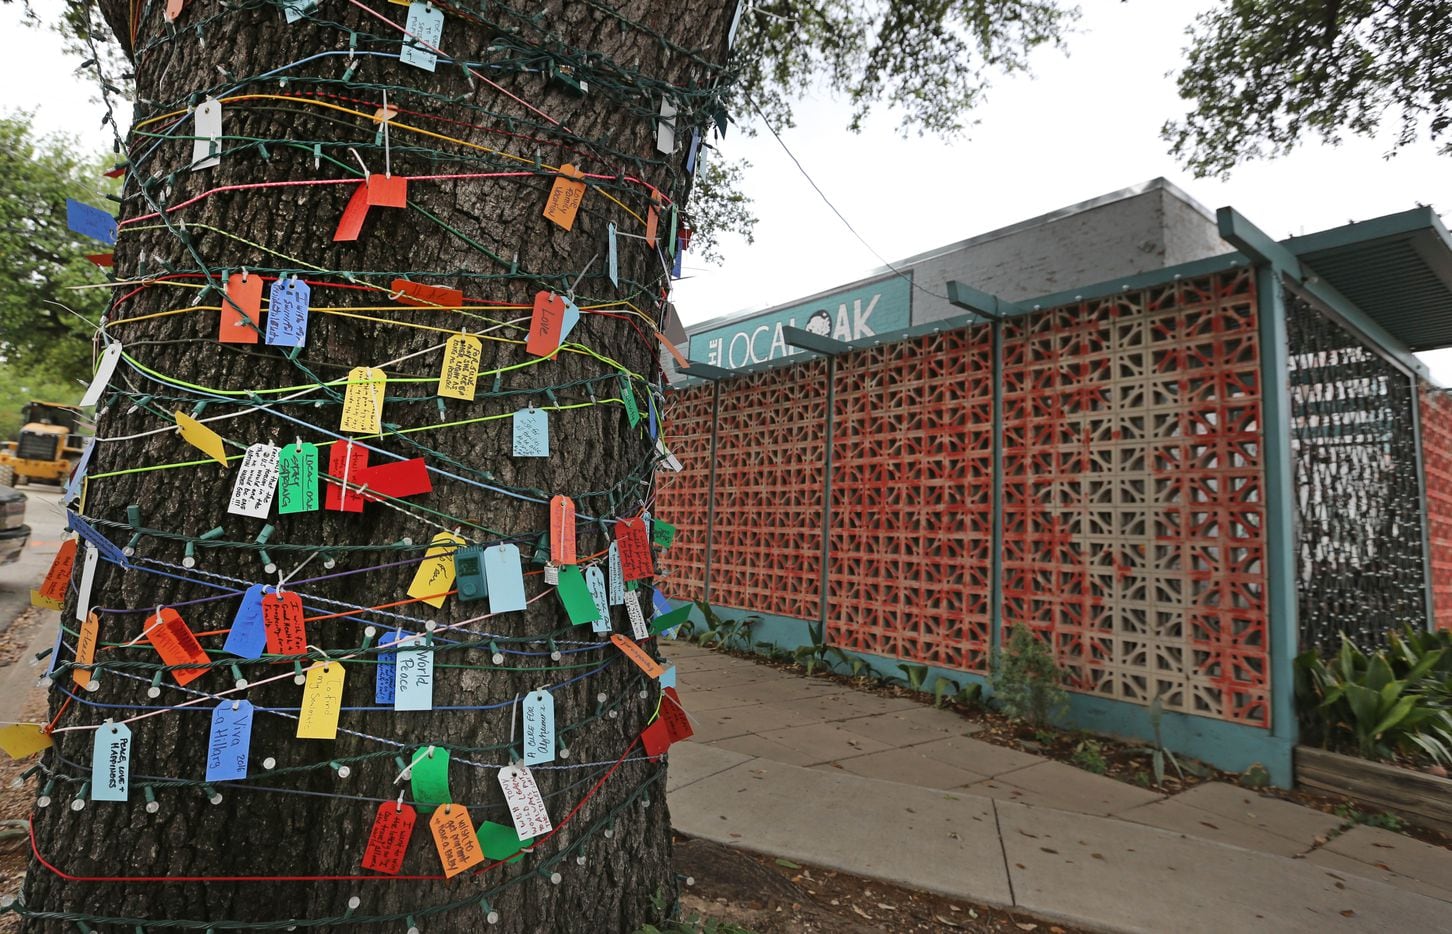 A tree covered with cards with wishes written on them is outside the Local Oak restaurant...